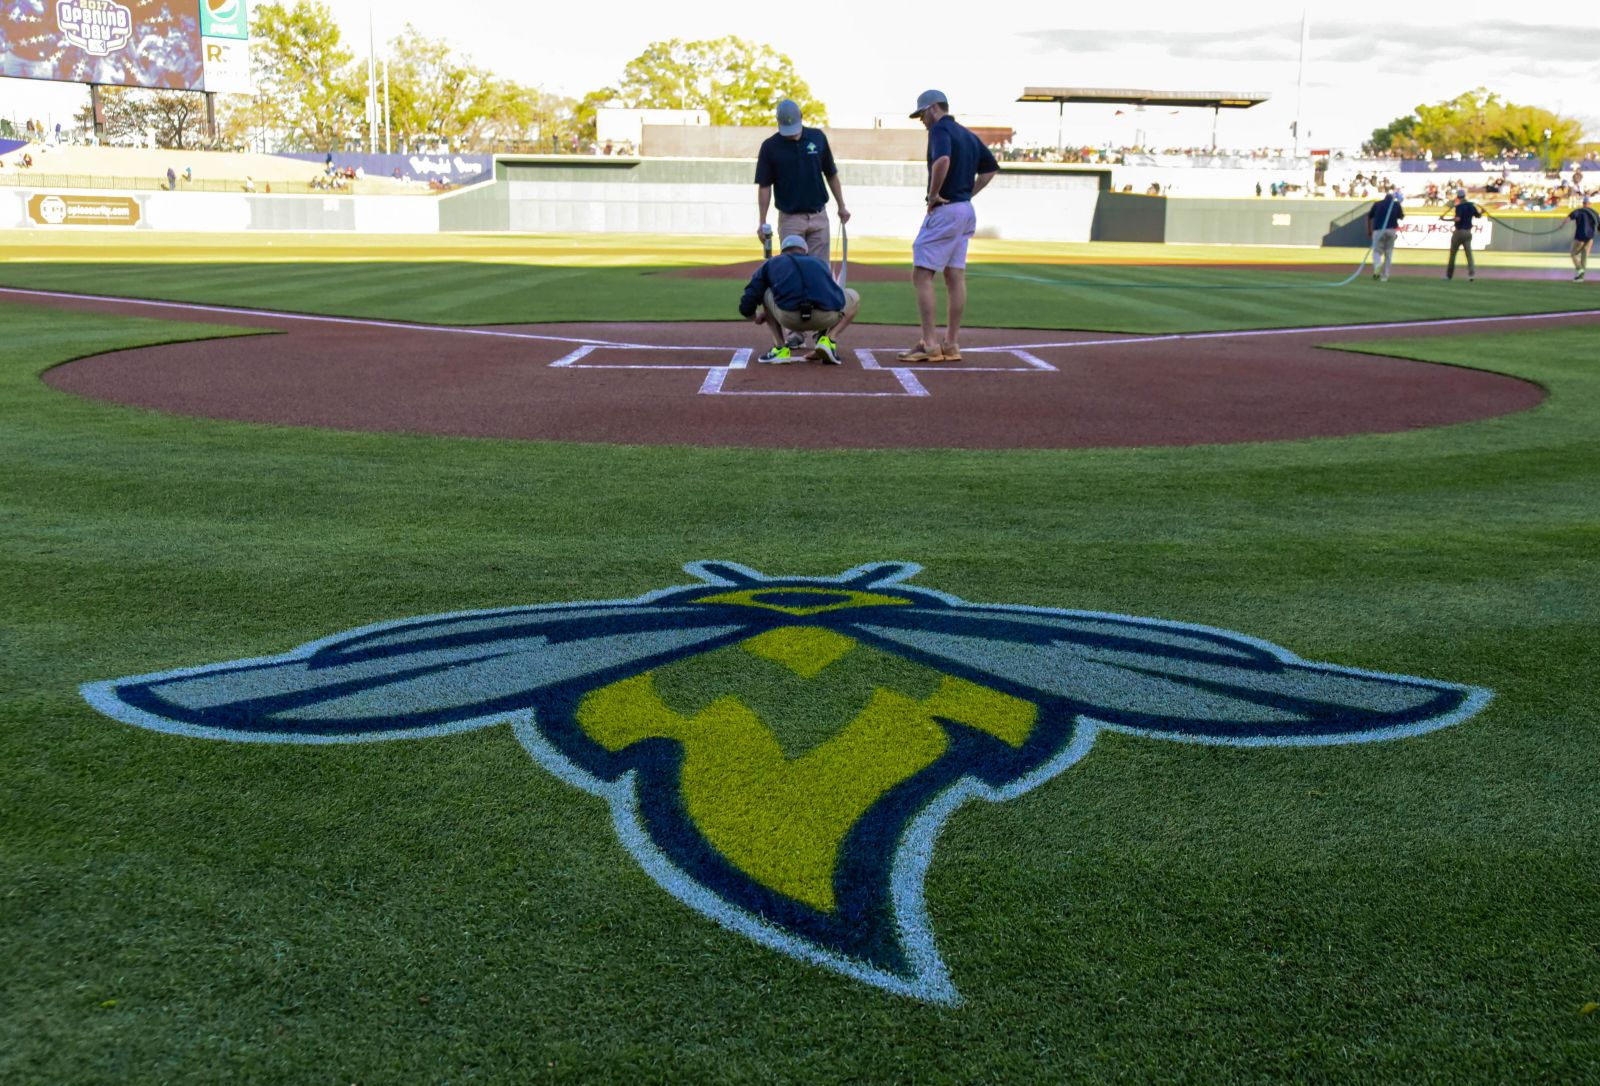 The Columbia Fireflies will become an affiliate of the Kansas City Royals, ensuring the team will remain affiliated with Major League Baseball. (Photo/File)